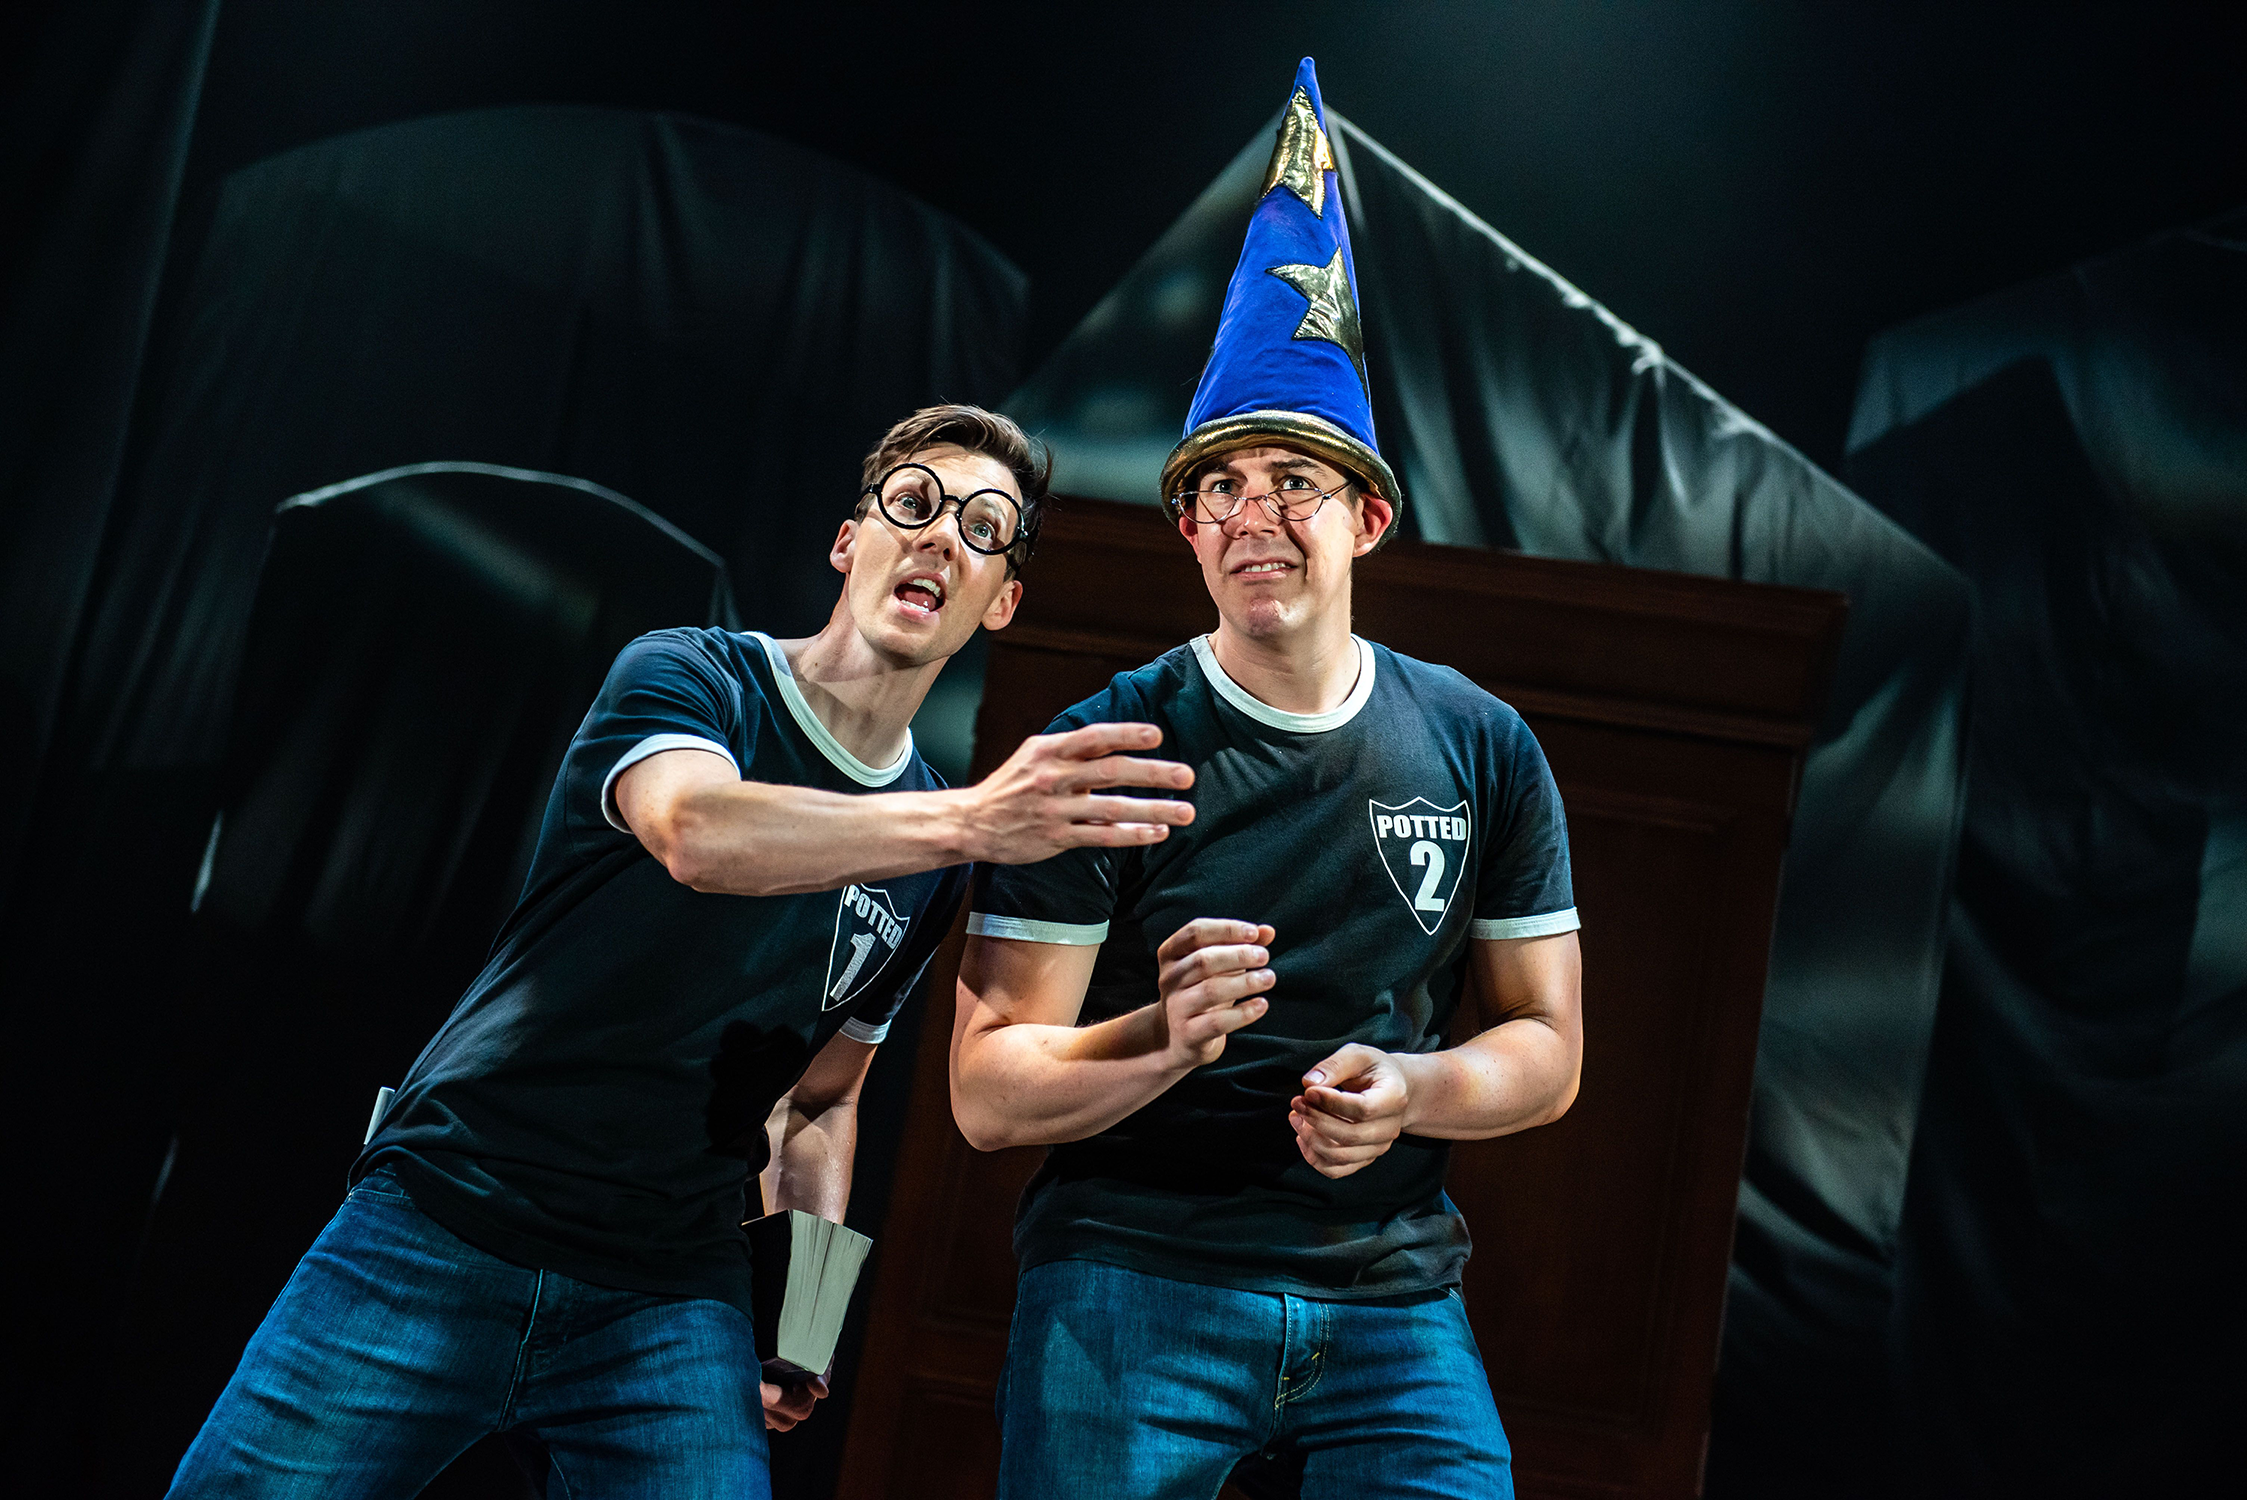 'Potted Potter' - AWARDED